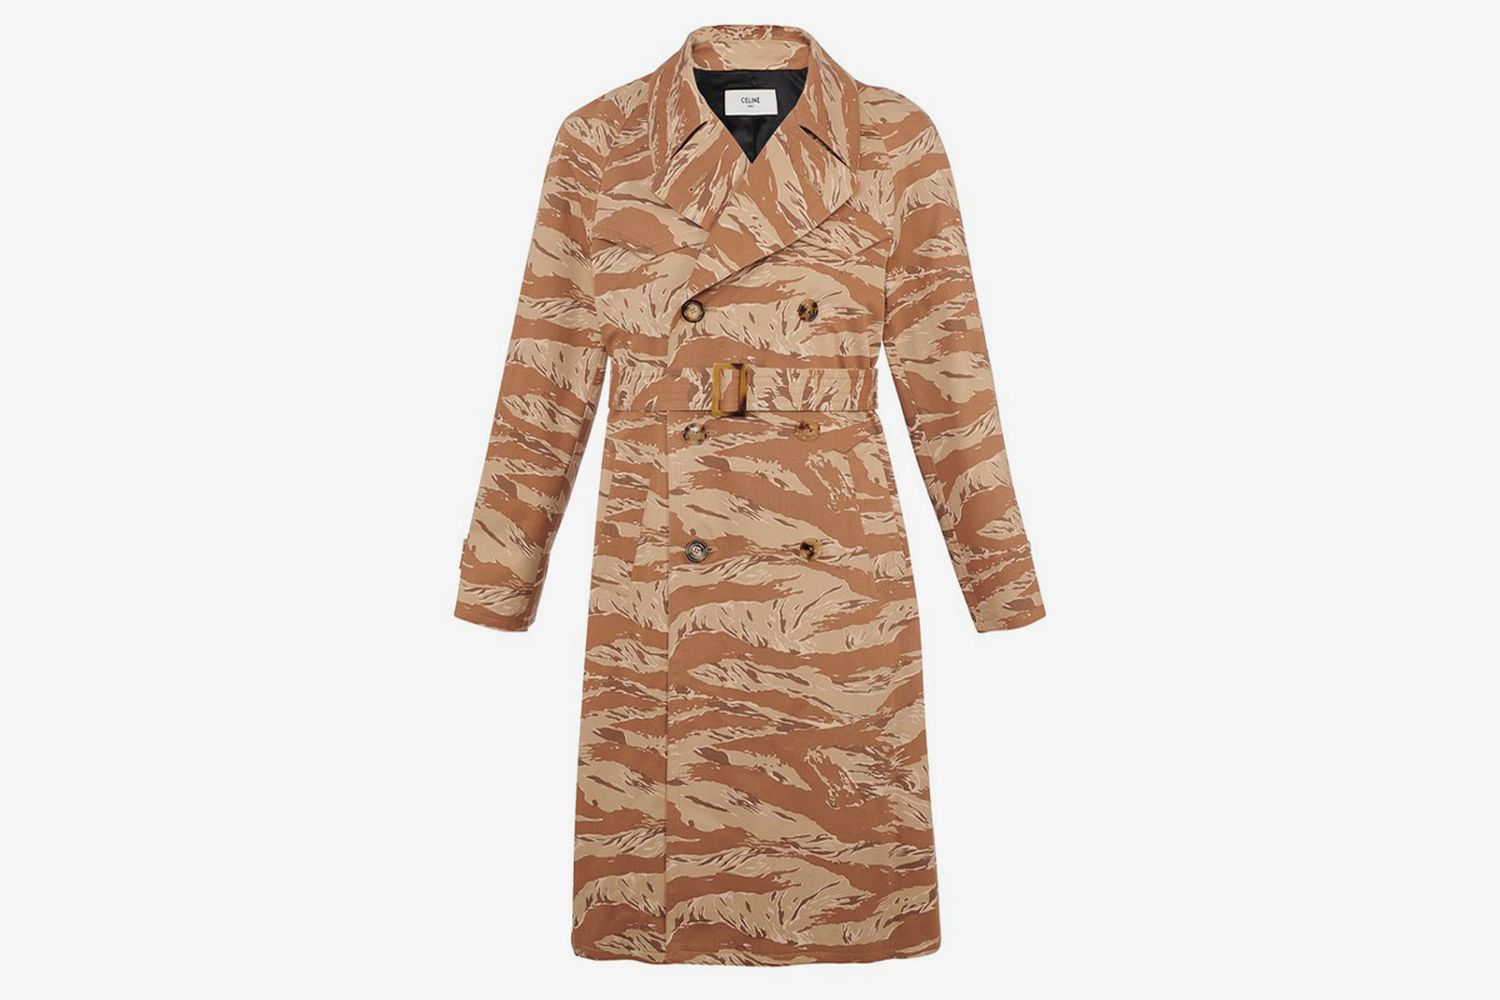 Western Camouflage Trench Coat